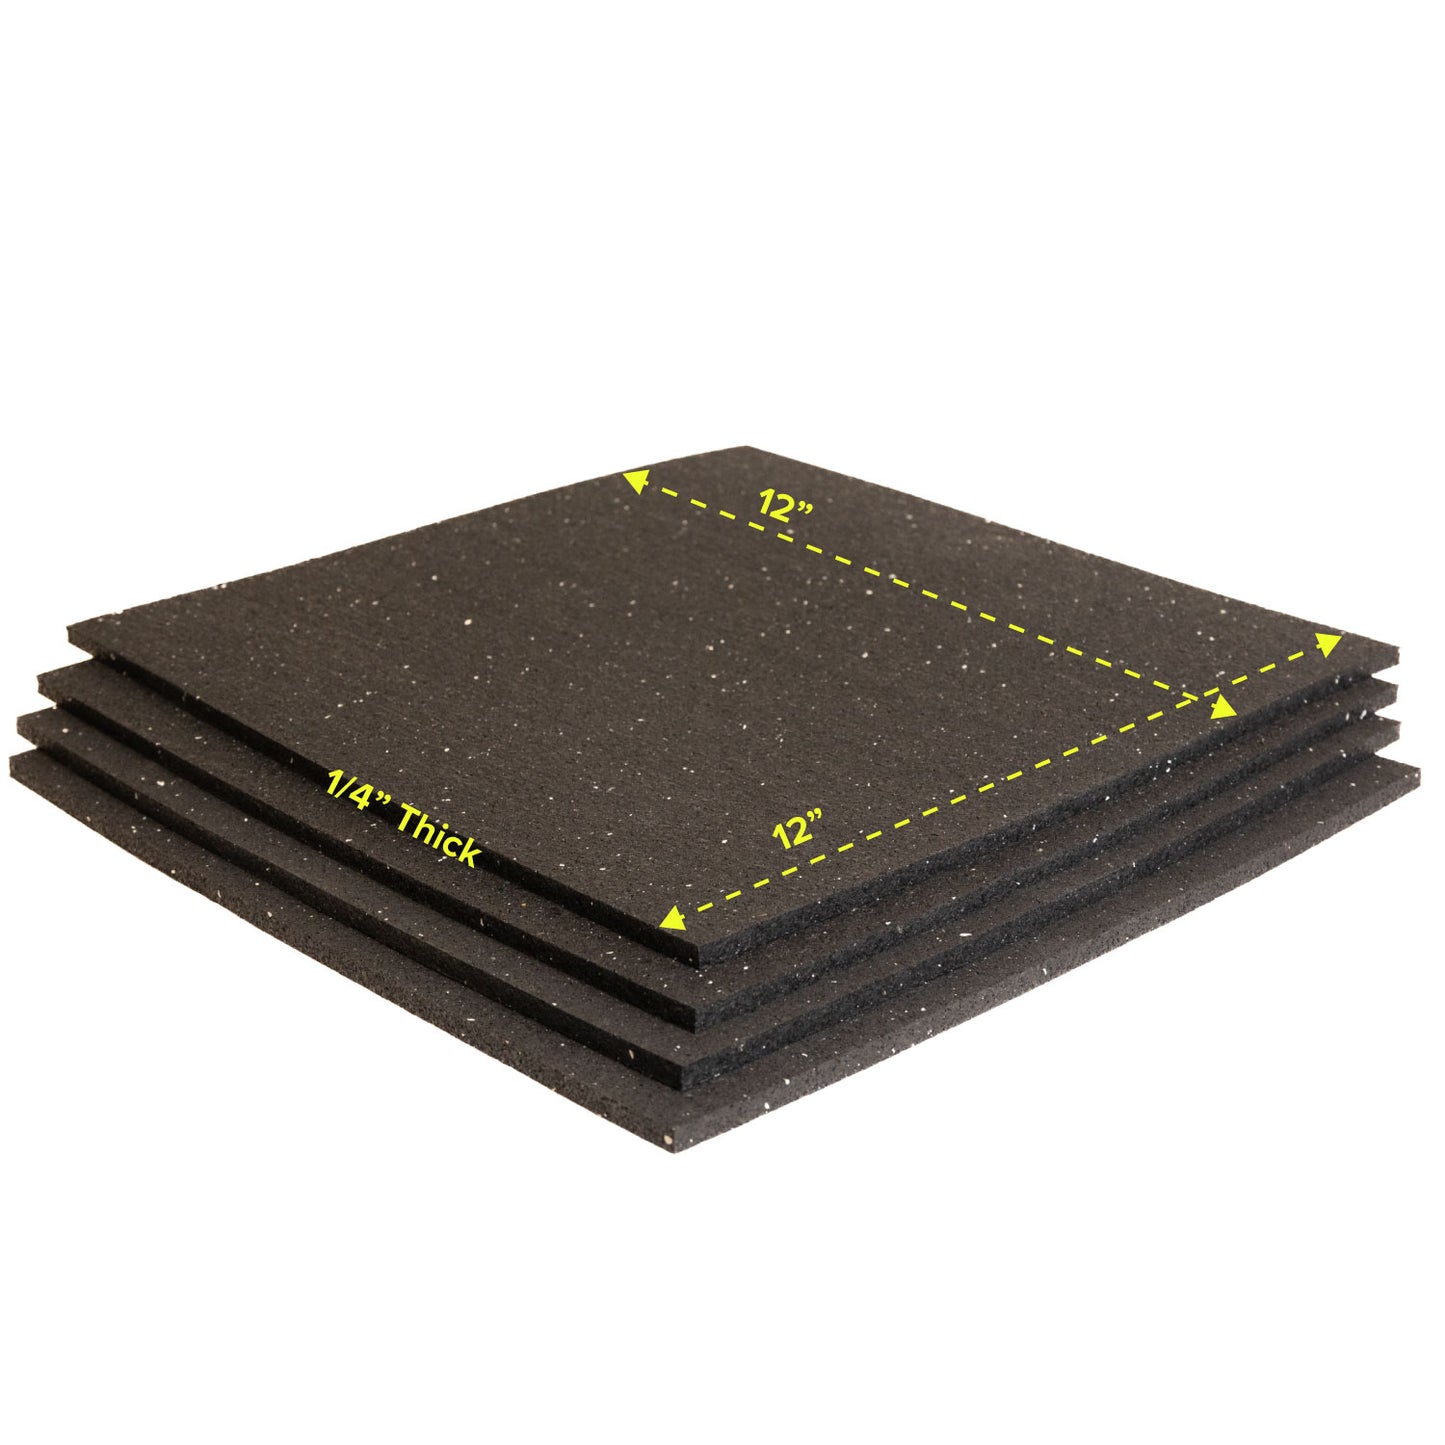 12x12 Rubber Support Pad (4-pack)